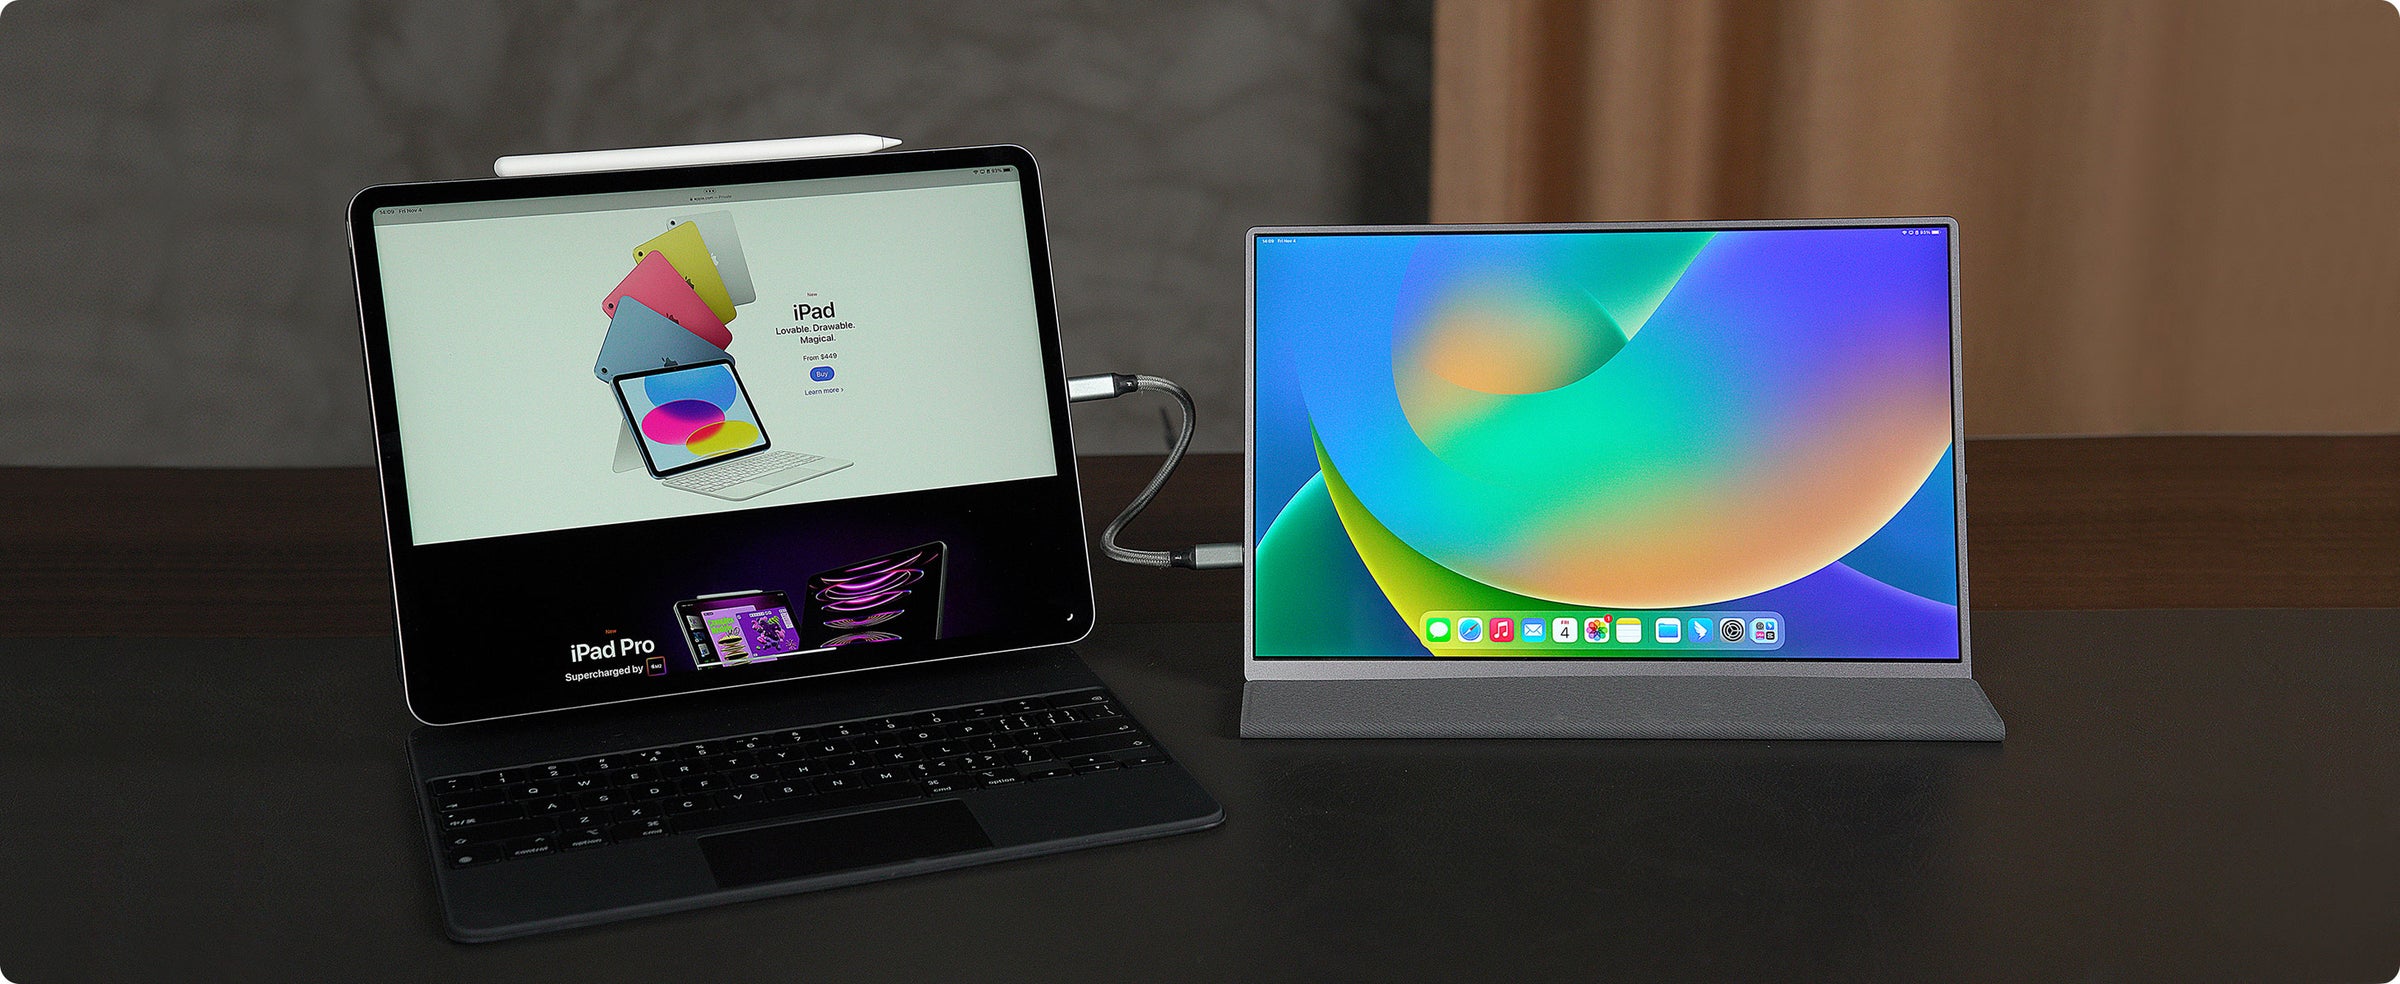 external monitor for iPad and iMac